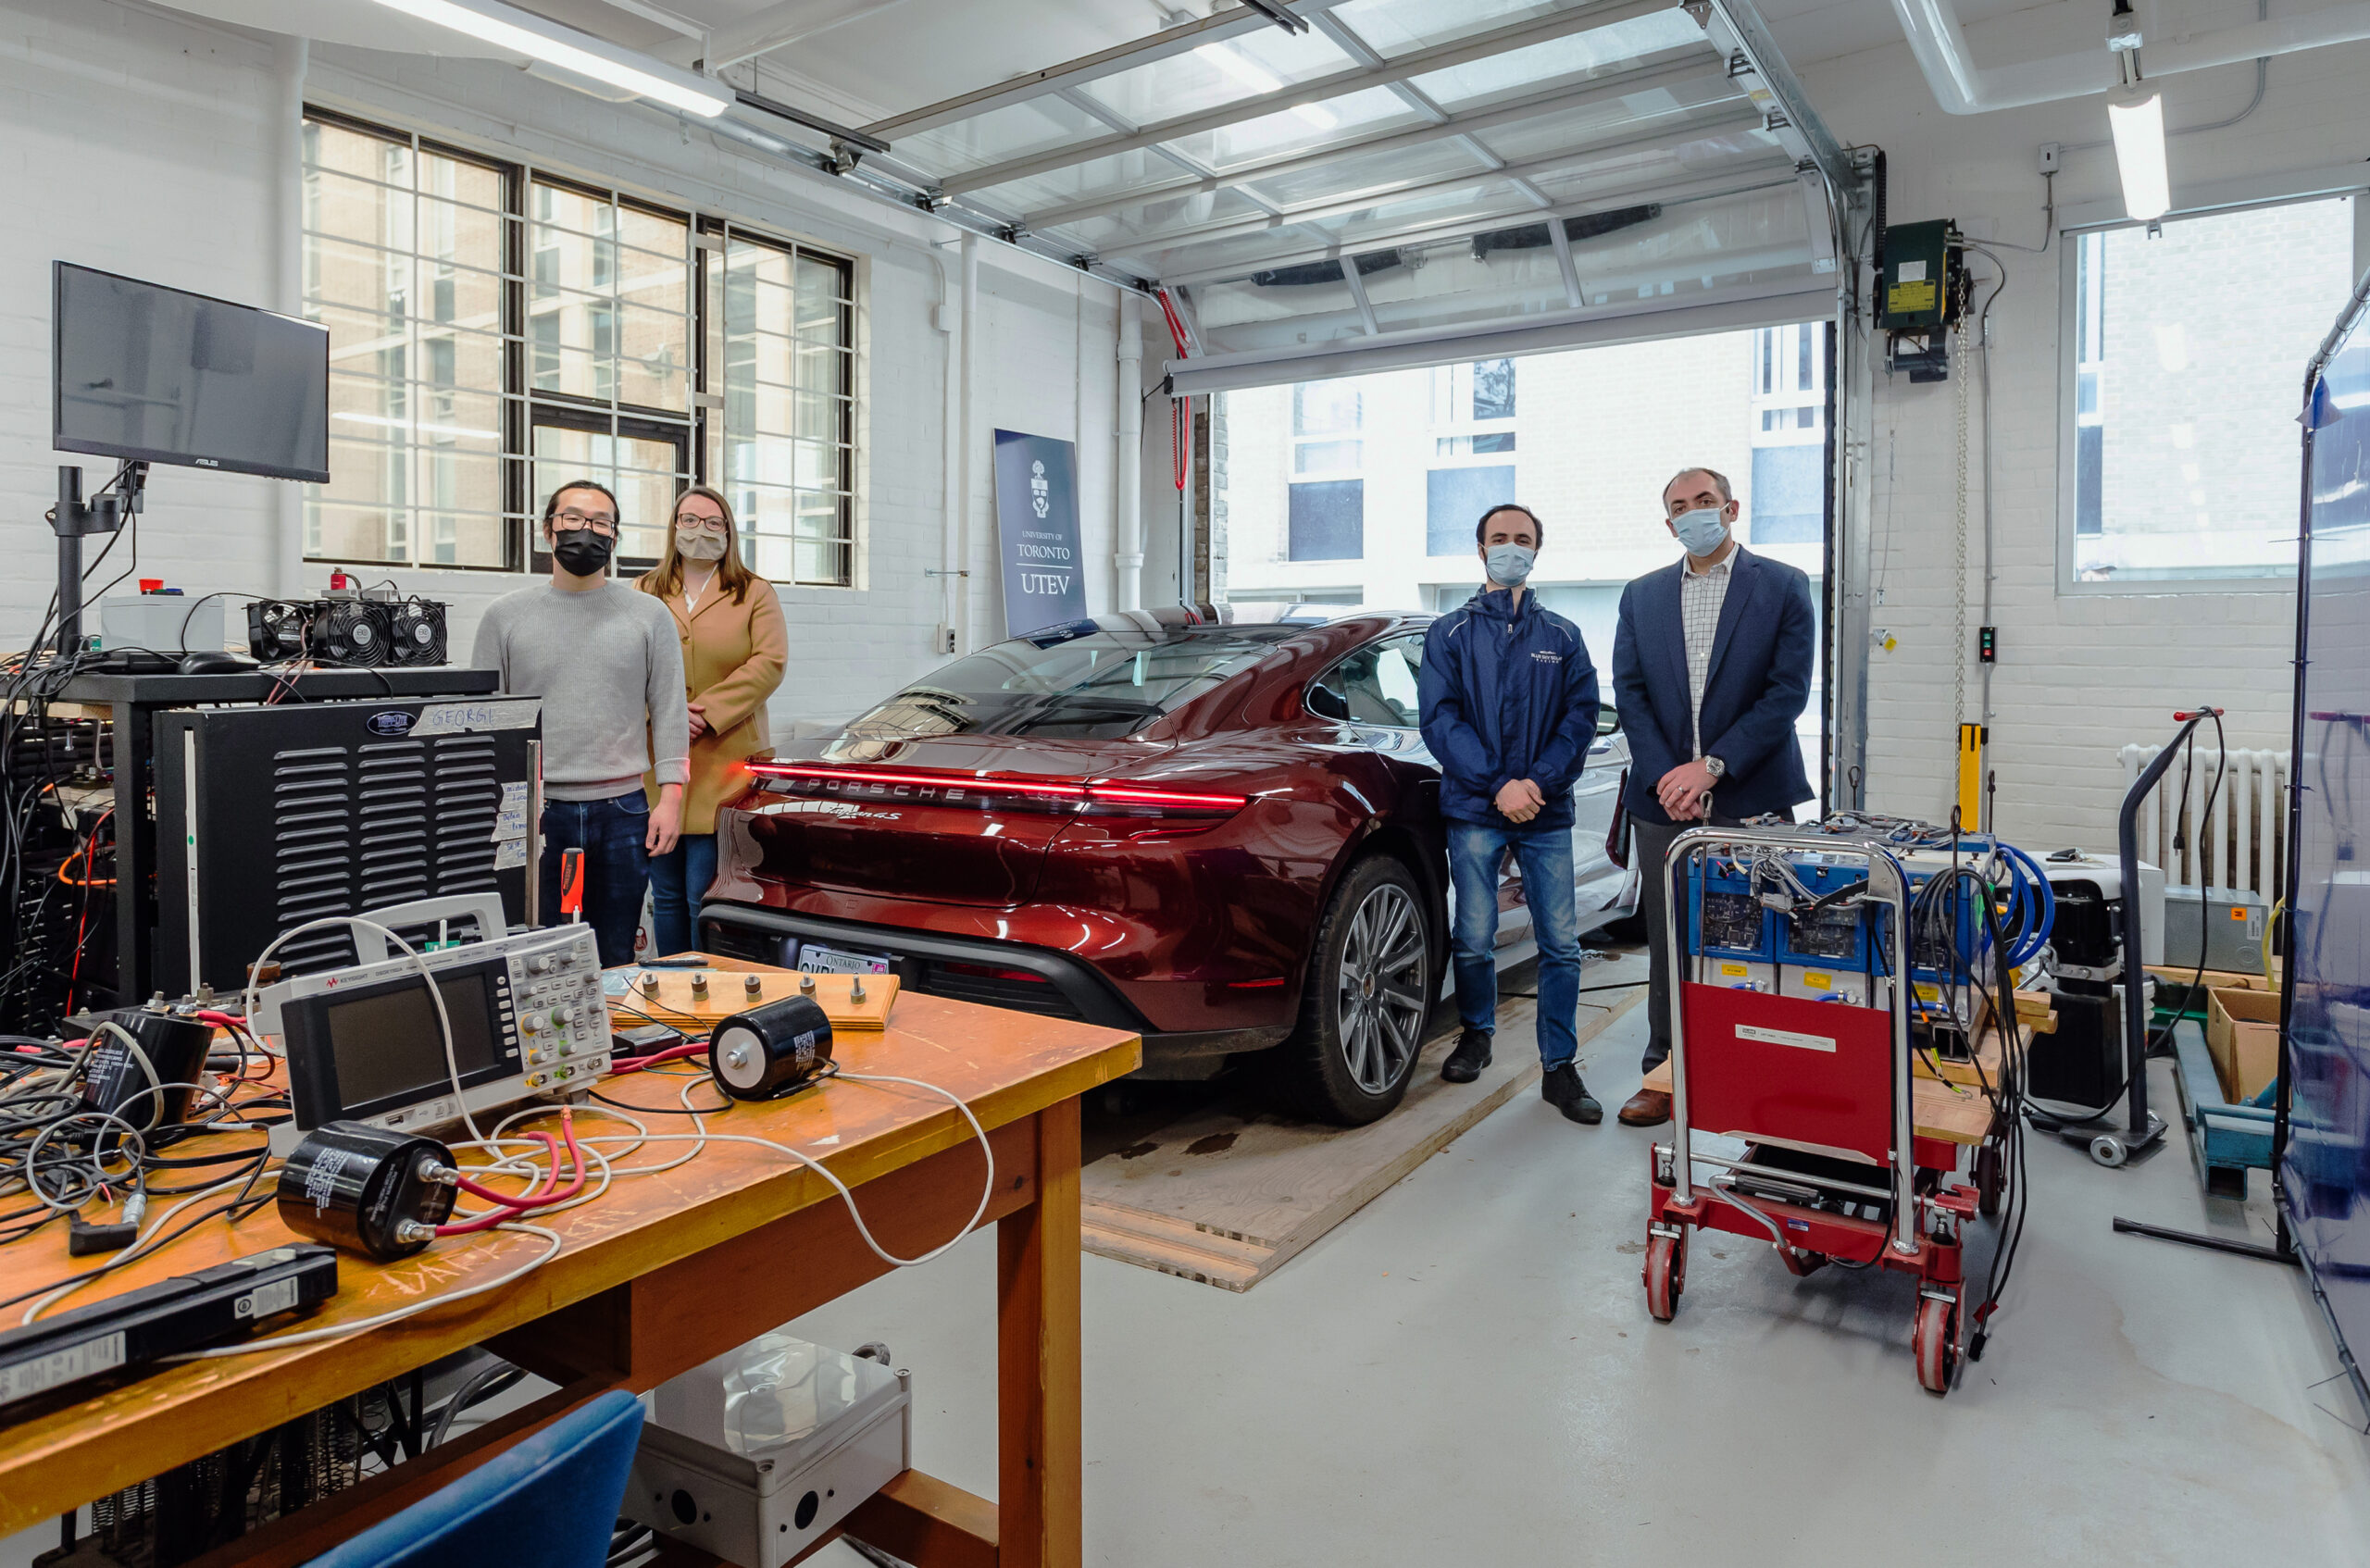 Professor Olivier Trescases (far right) stands in the University of Toronto Electric Vehicle Research Centre with (left to right) PhD Candidate, Zhe Gong; Wendy Baker, Associate Director Business Development, School of Continuing Studies; and Nick Cusimano, Research Associate.